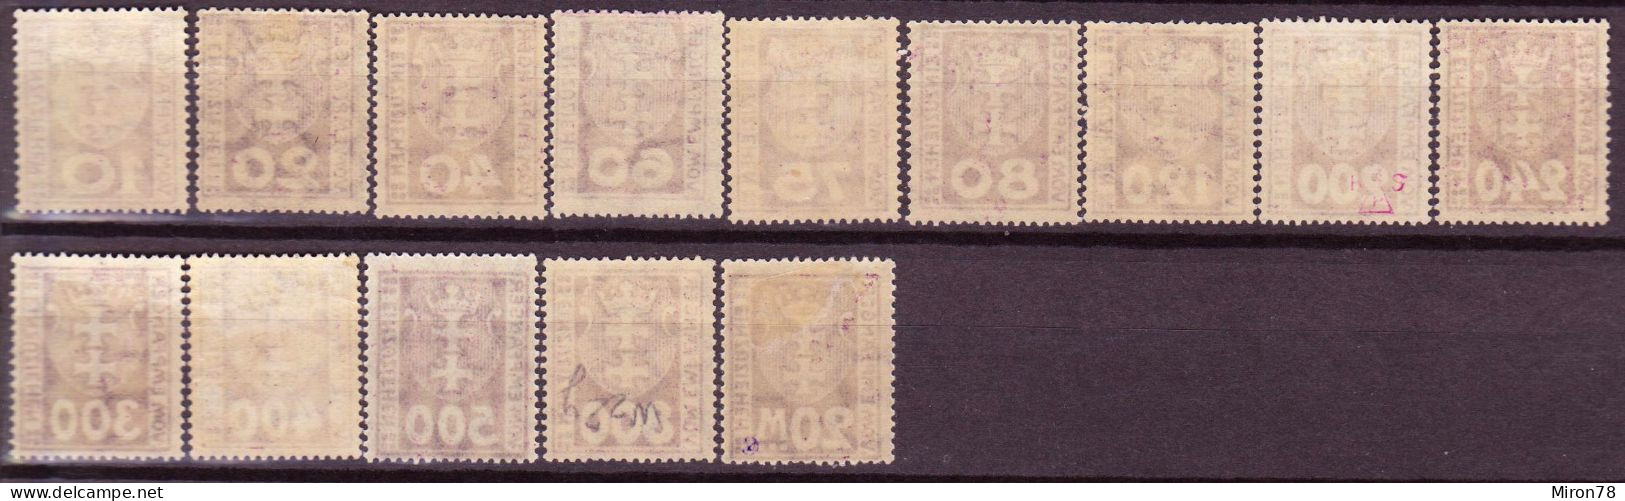 Stamps Danzig 1923 POSTAGE DUE STAMPS Mint MNH Lot6 - Segnatasse